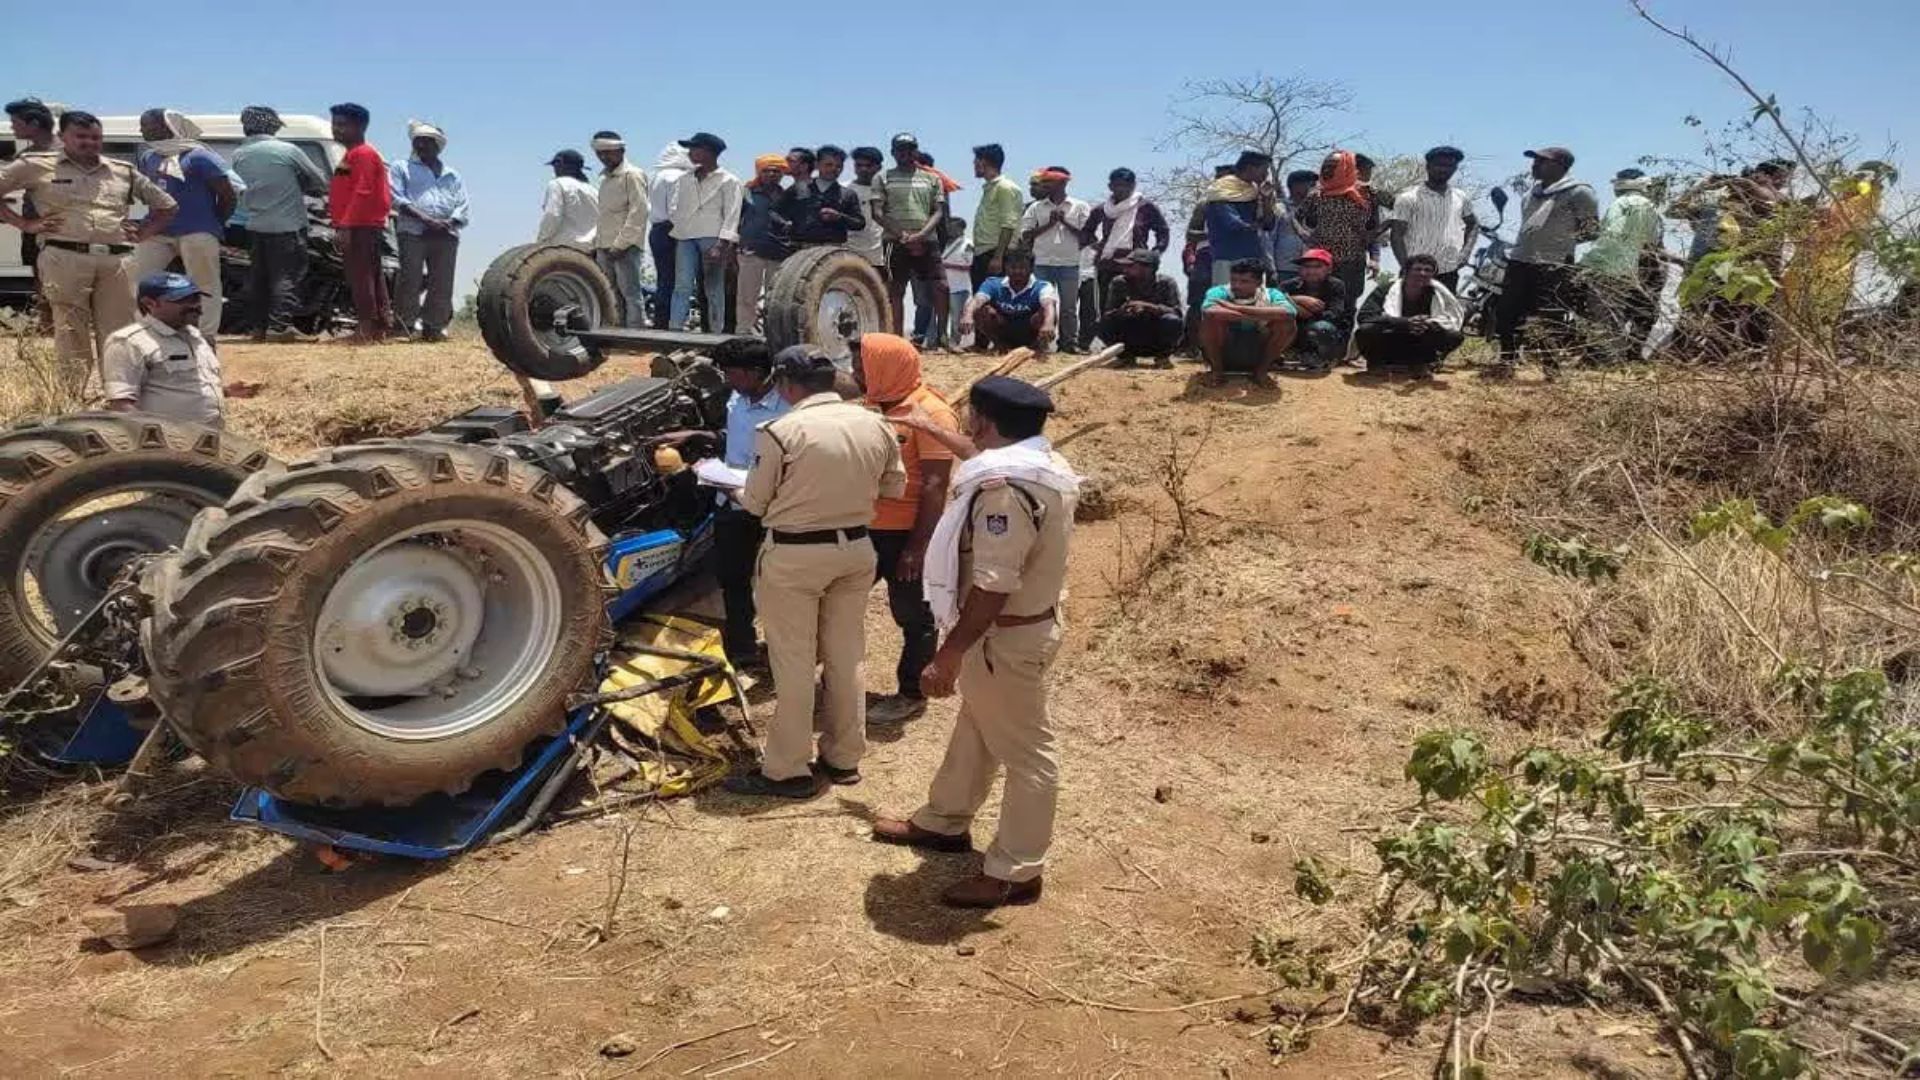 4 Dead, 20 Injured After Tractor Overturned In Madhya Pradesh